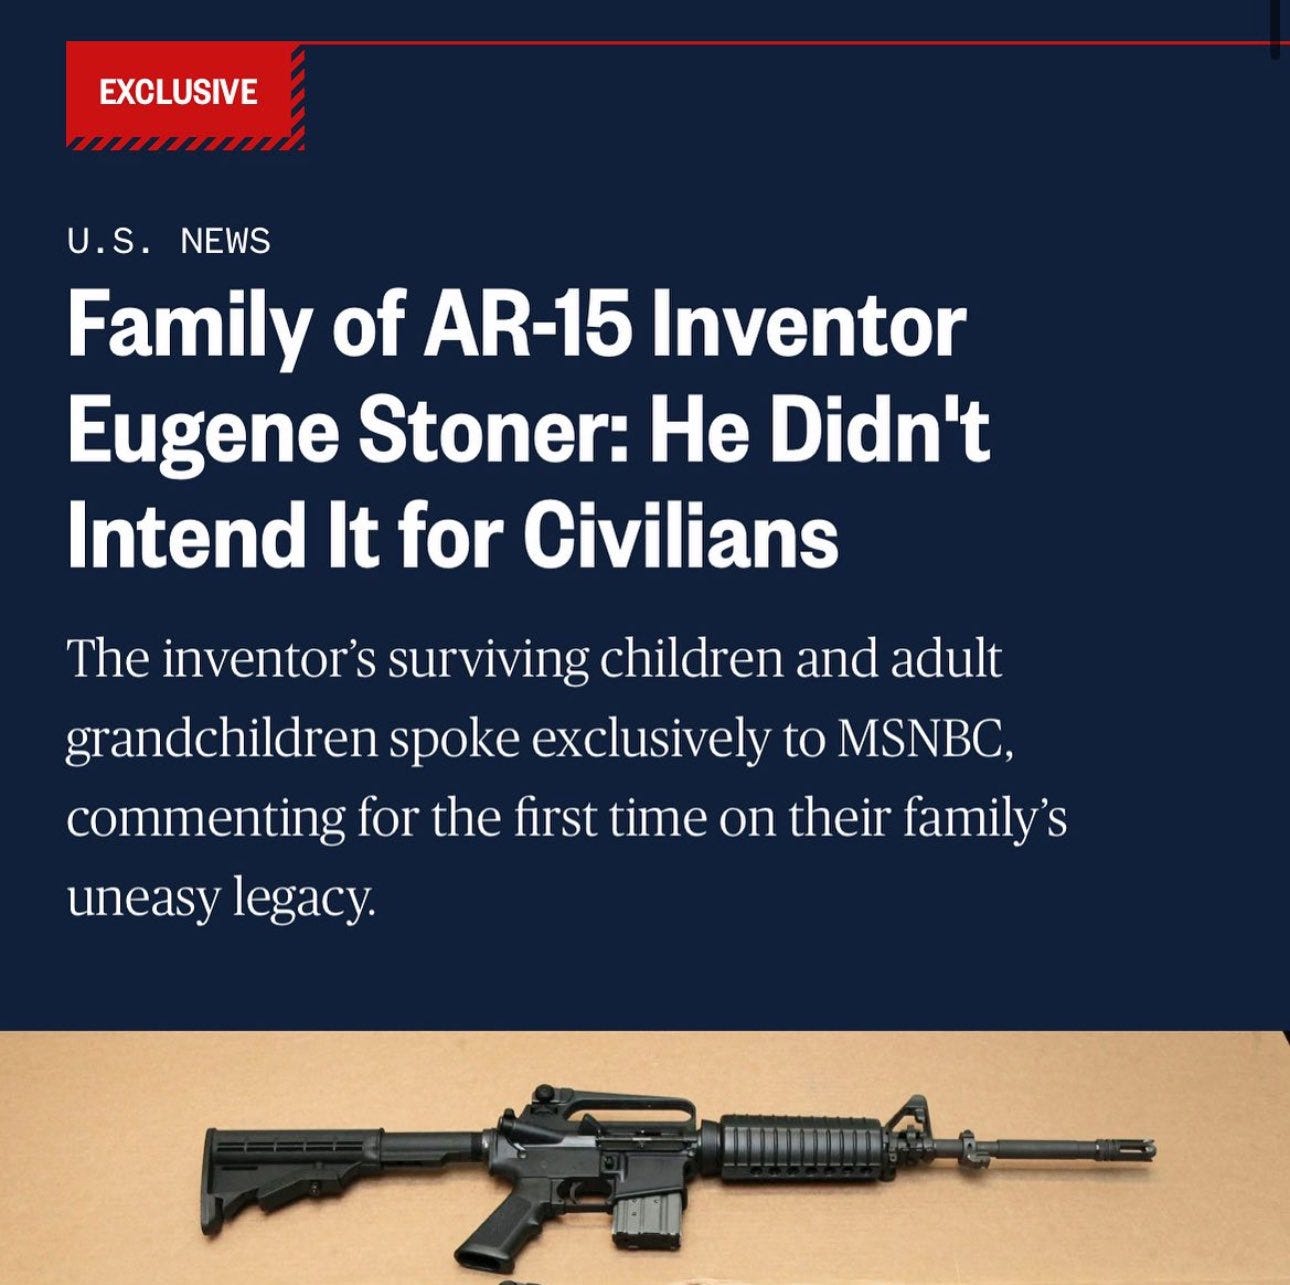 AR-15 Inventor Didn't Intend It for Civilians" and other lies